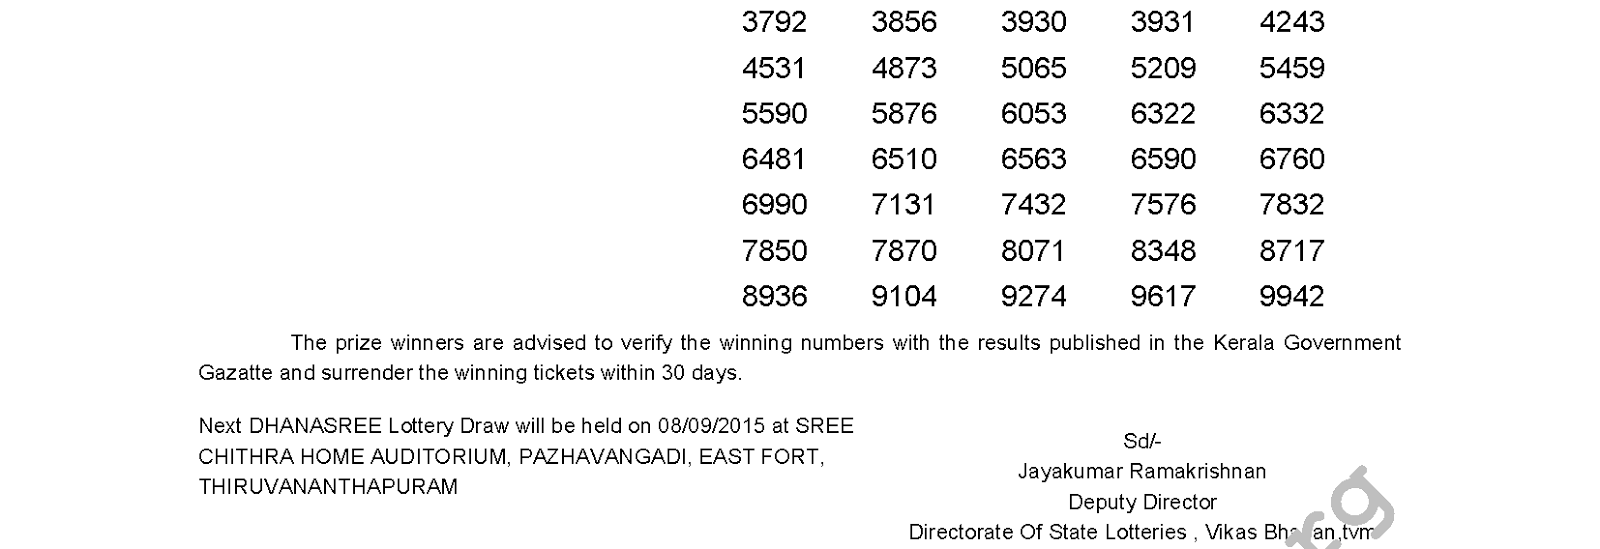 DHANASREE Lottery DS 201 Result 1-9-2015